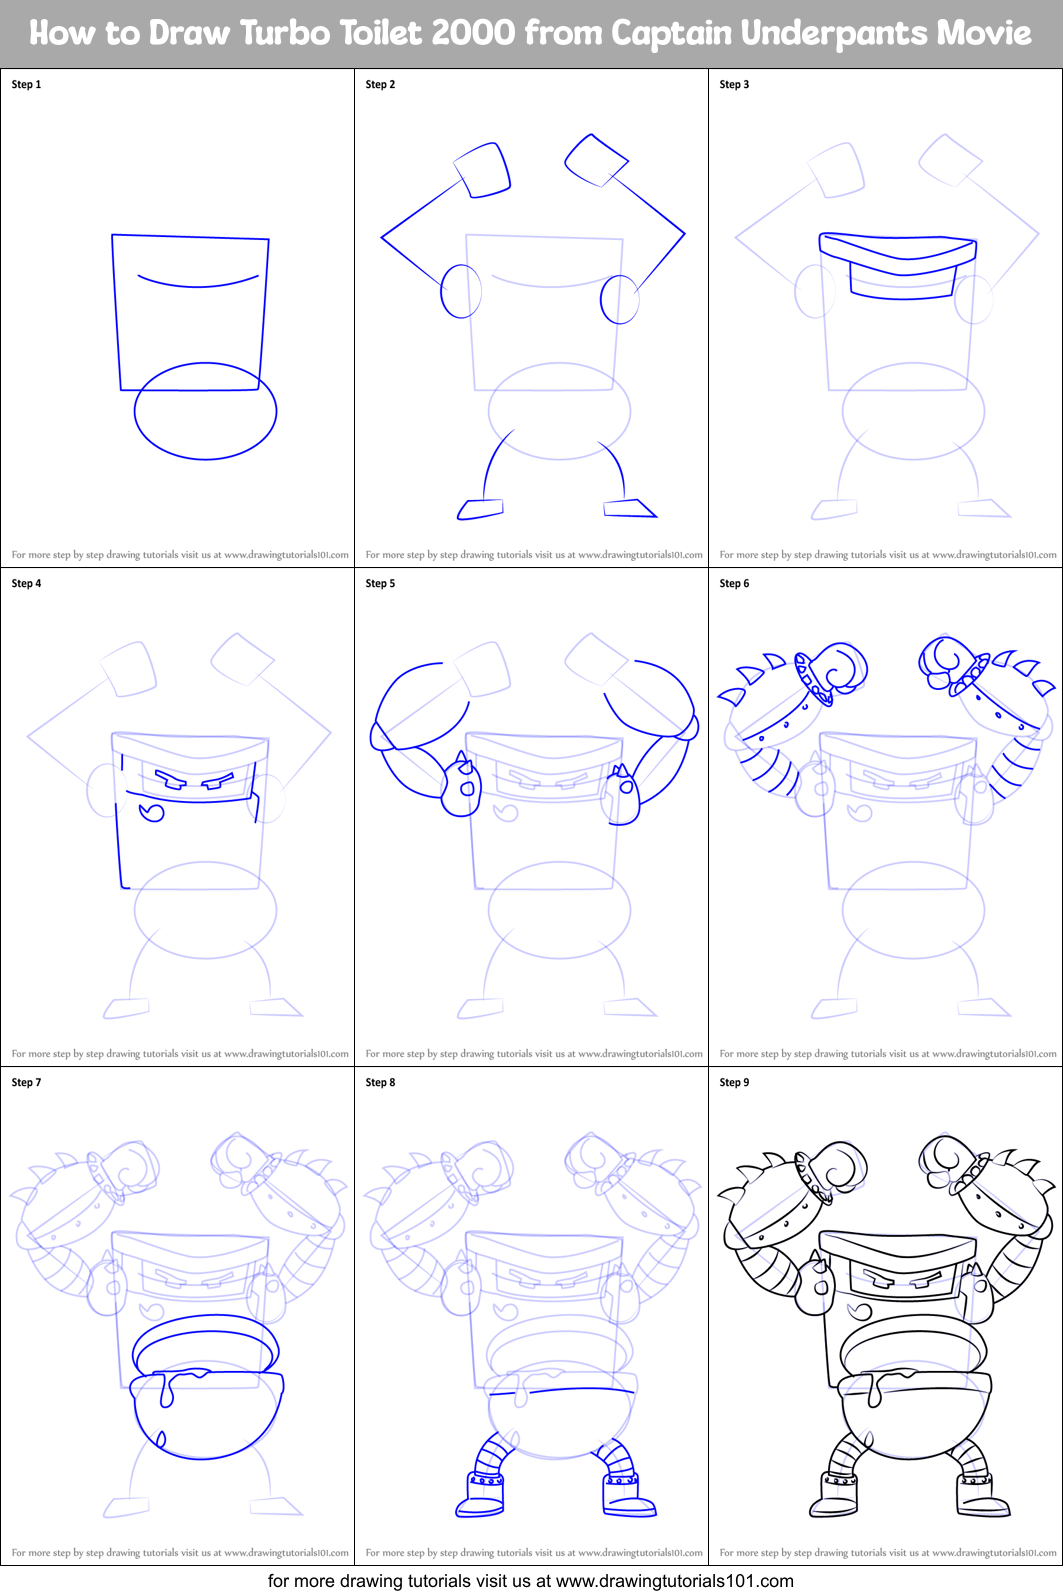 How to Draw Turbo Toilet 2000 from Captain Underpants Movie printable